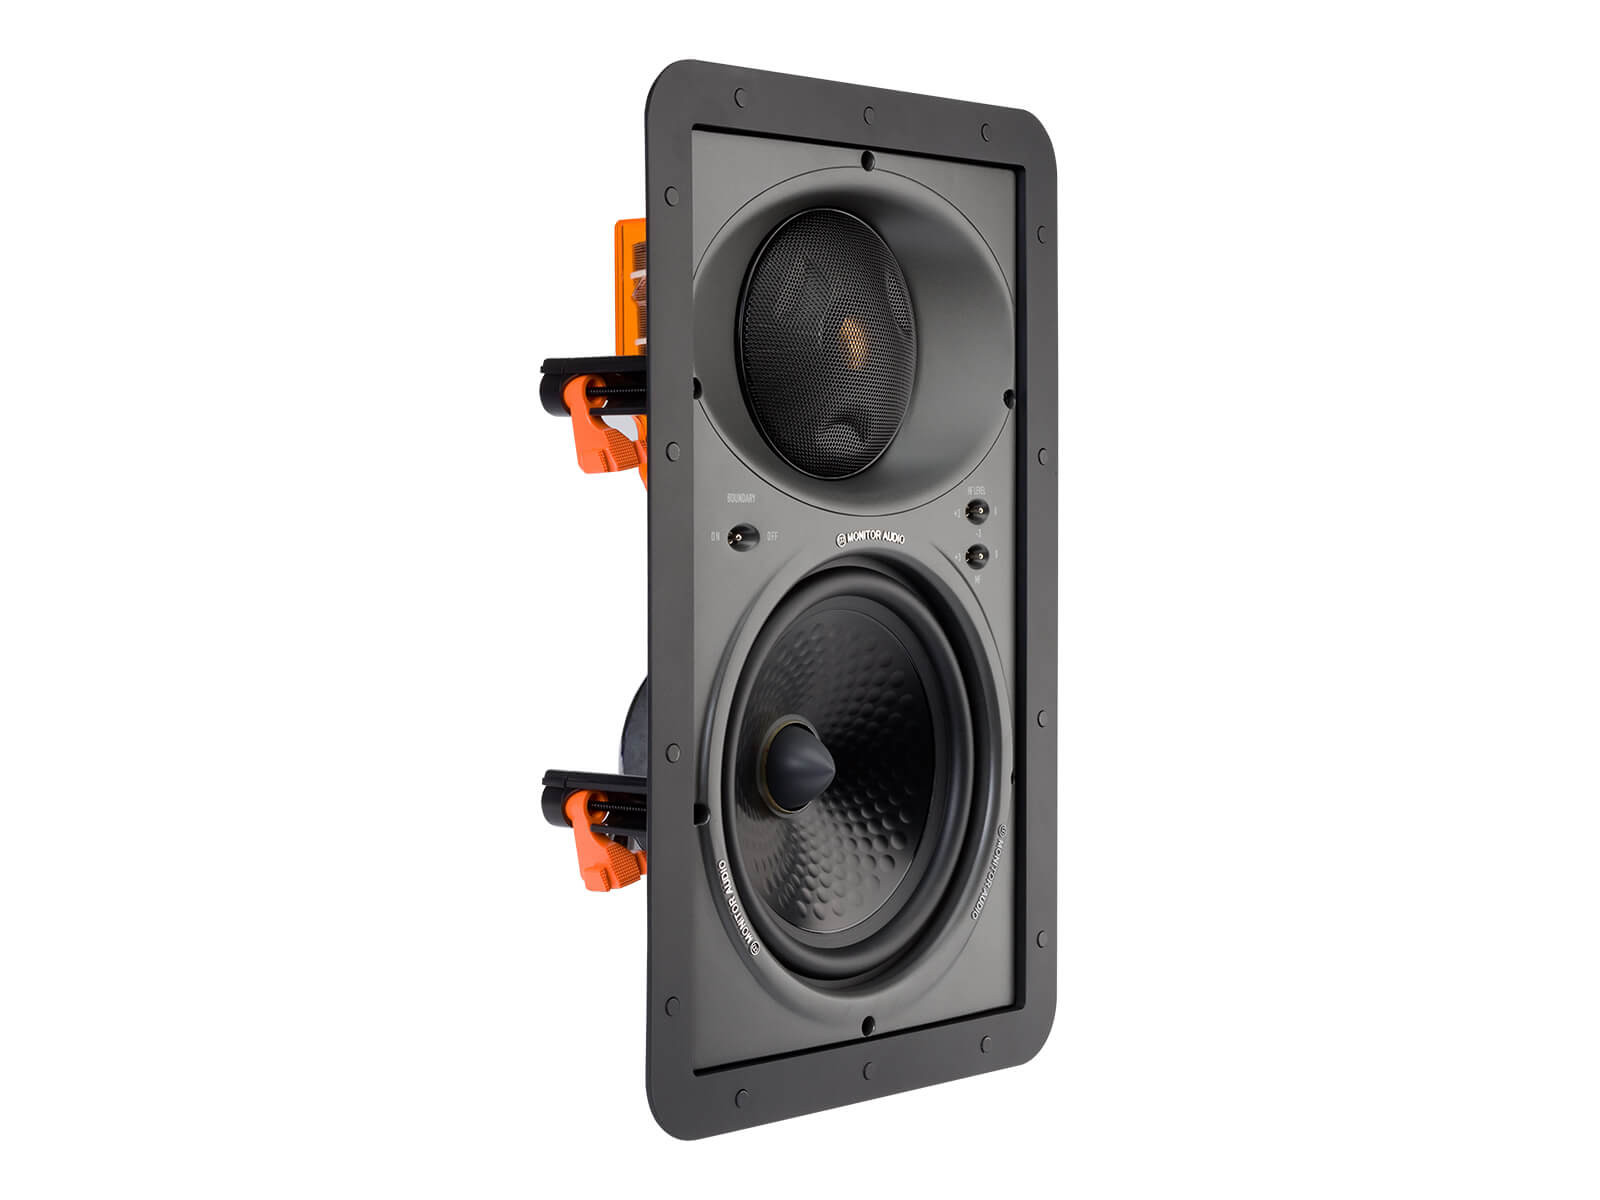 Core W380-IDC, front ISO, grille-less in-wall speakers.